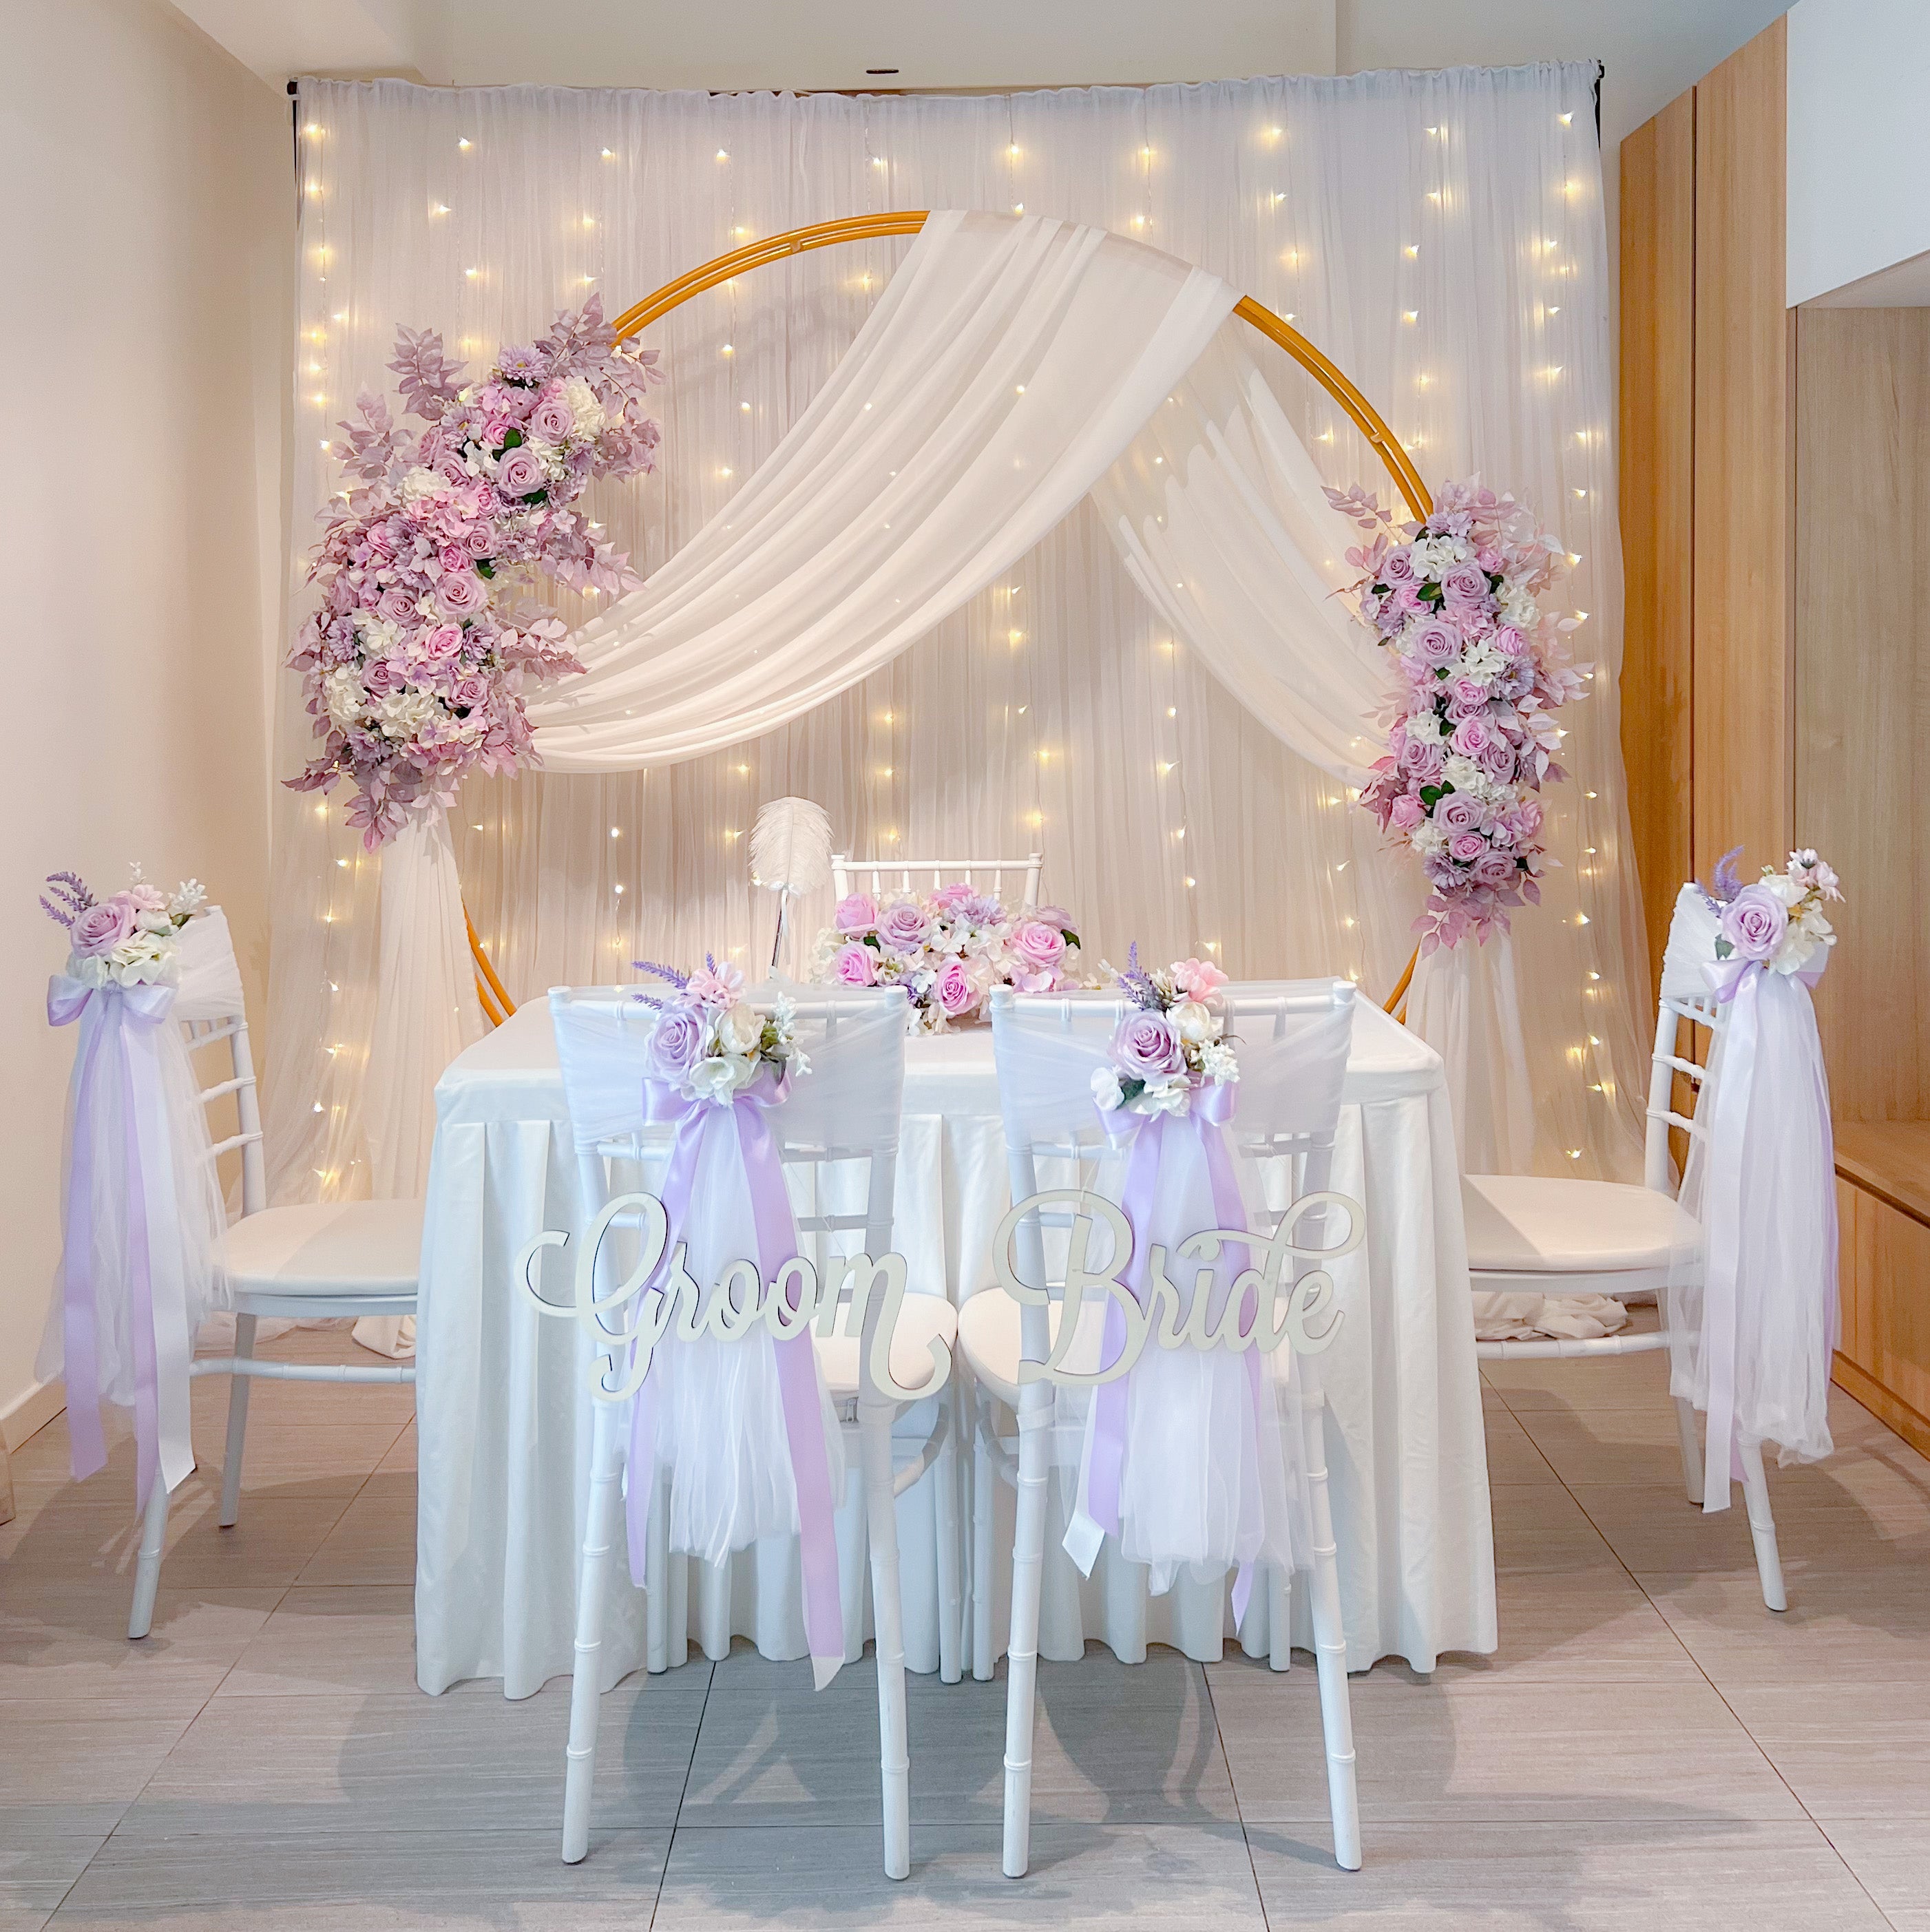 Sweet and Simple Home Solemnisation/ROM Decor in Singapore - White & Purple Theme with Round Arch & Fairy-lights